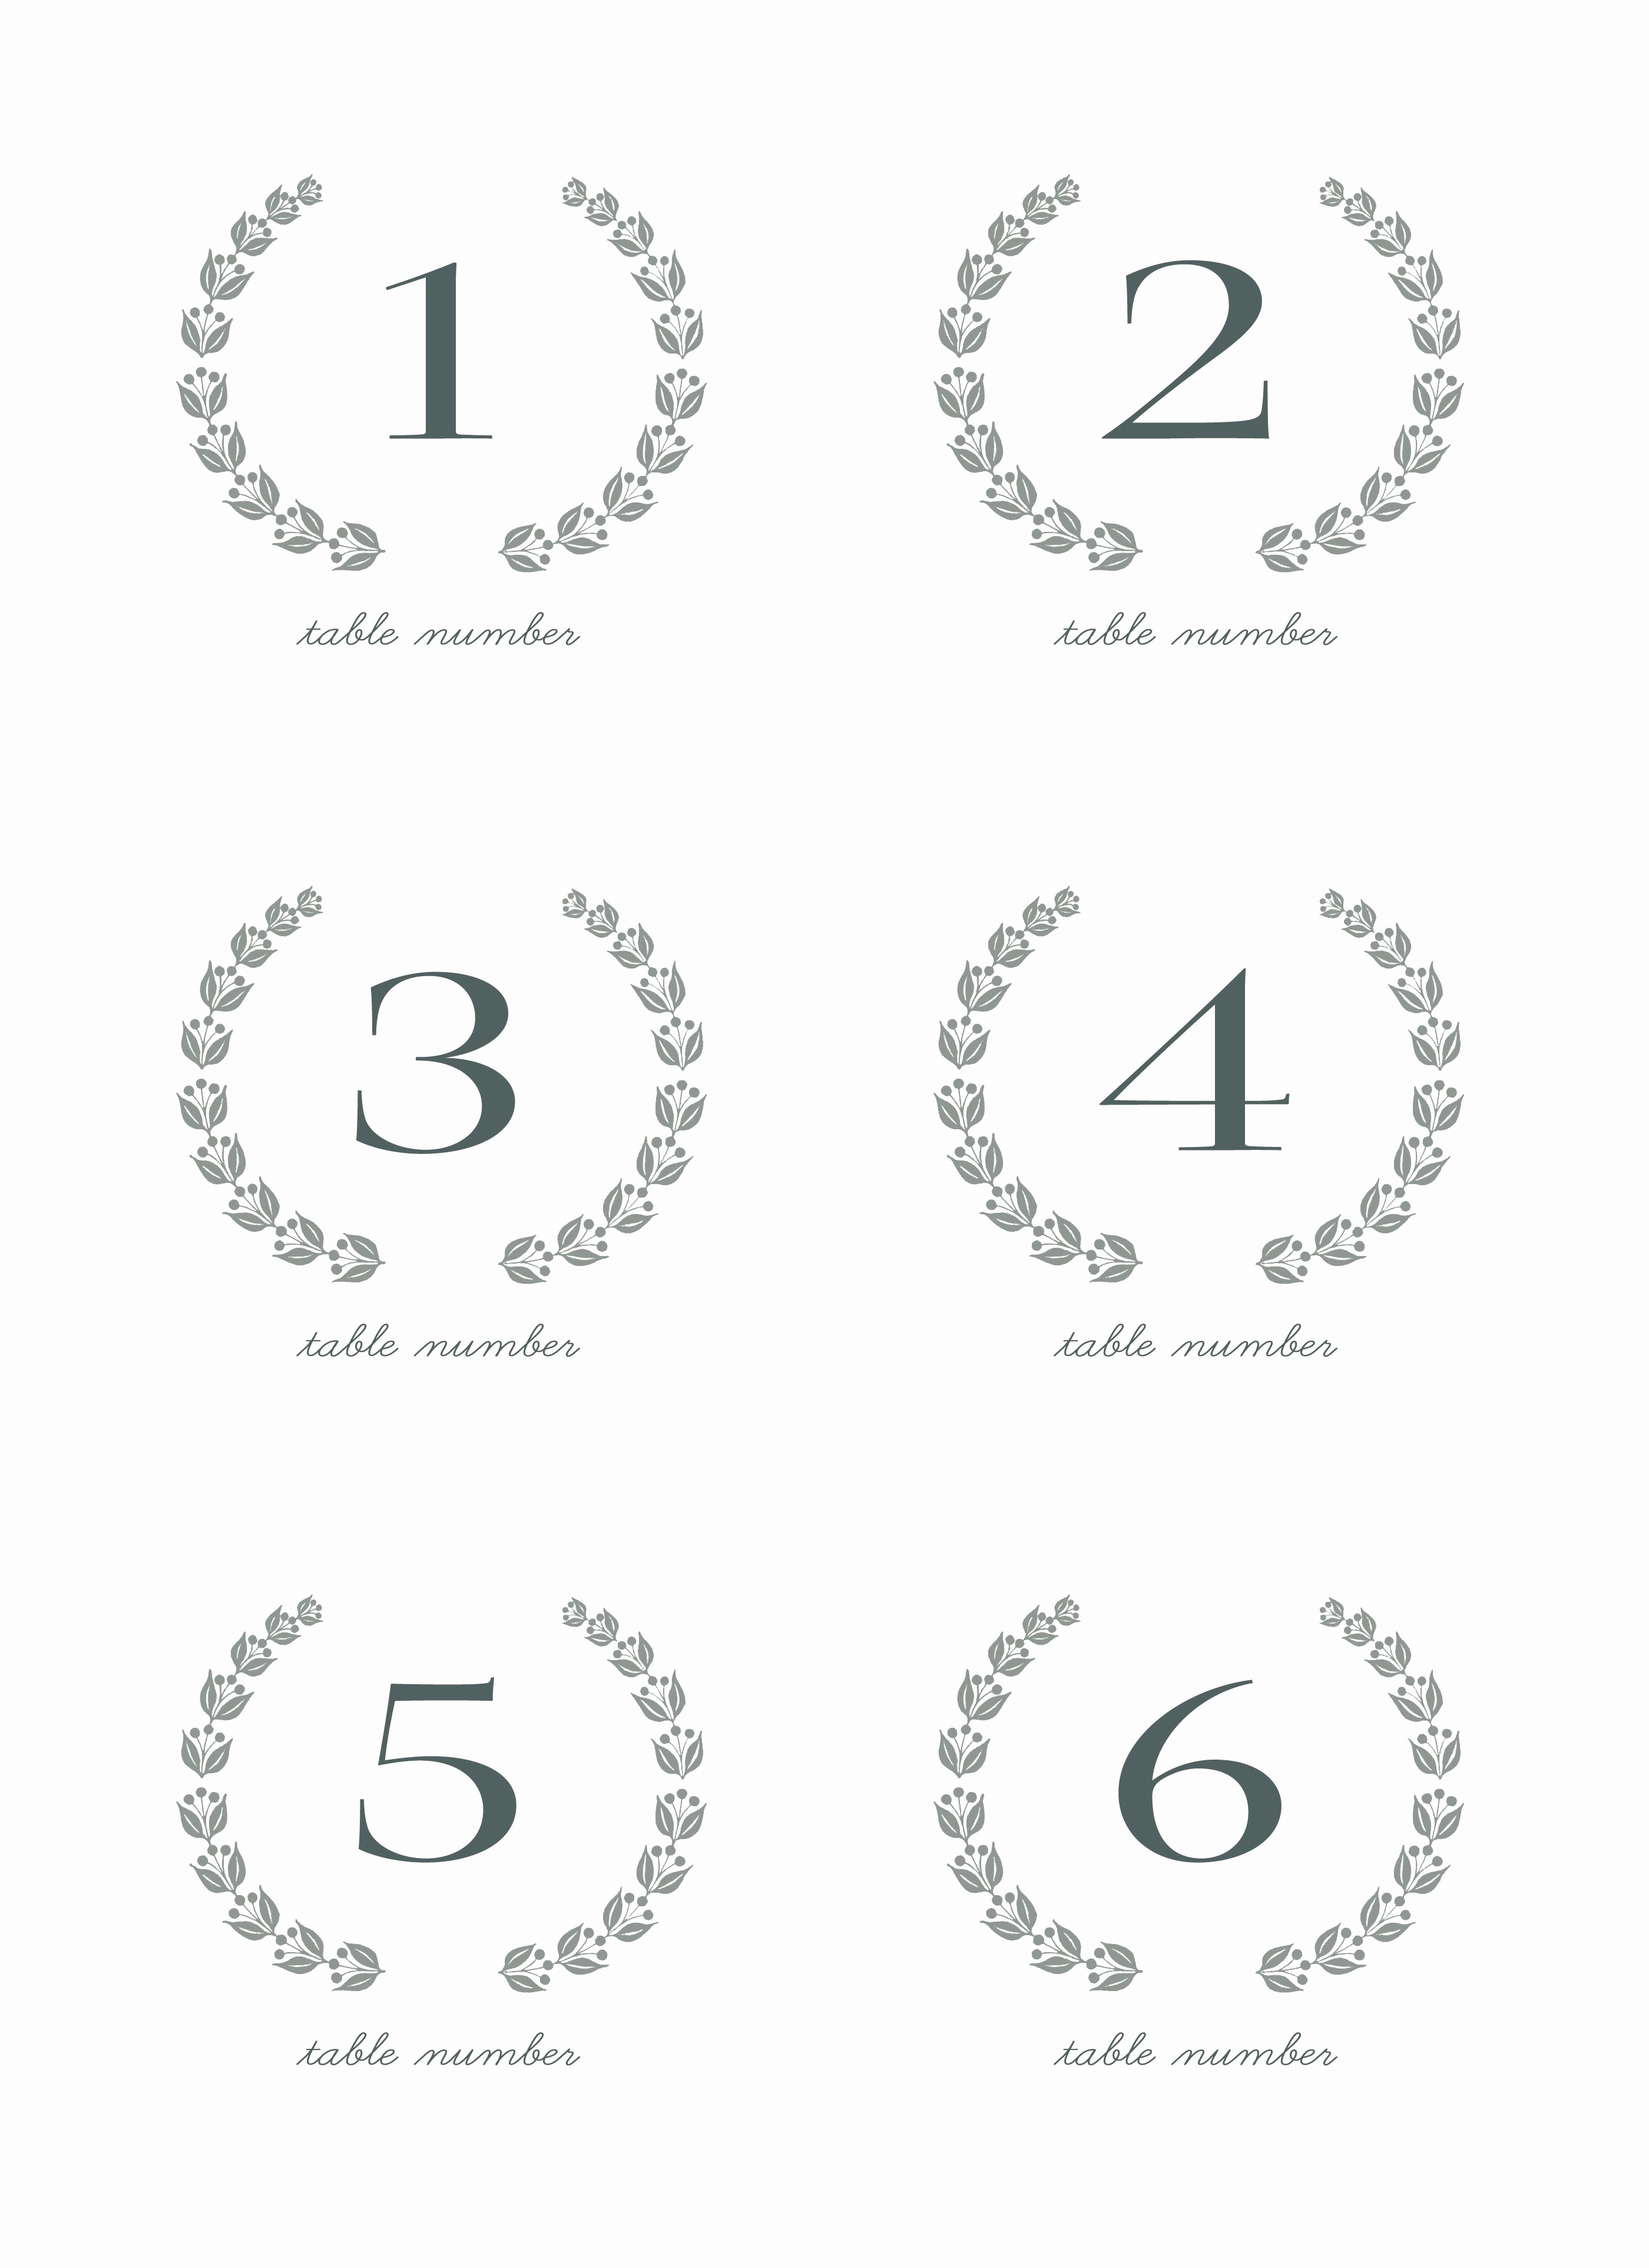 28 Elegant Printable Table Numbers | Kittybabylove - Free Printable Table Numbers 1 20